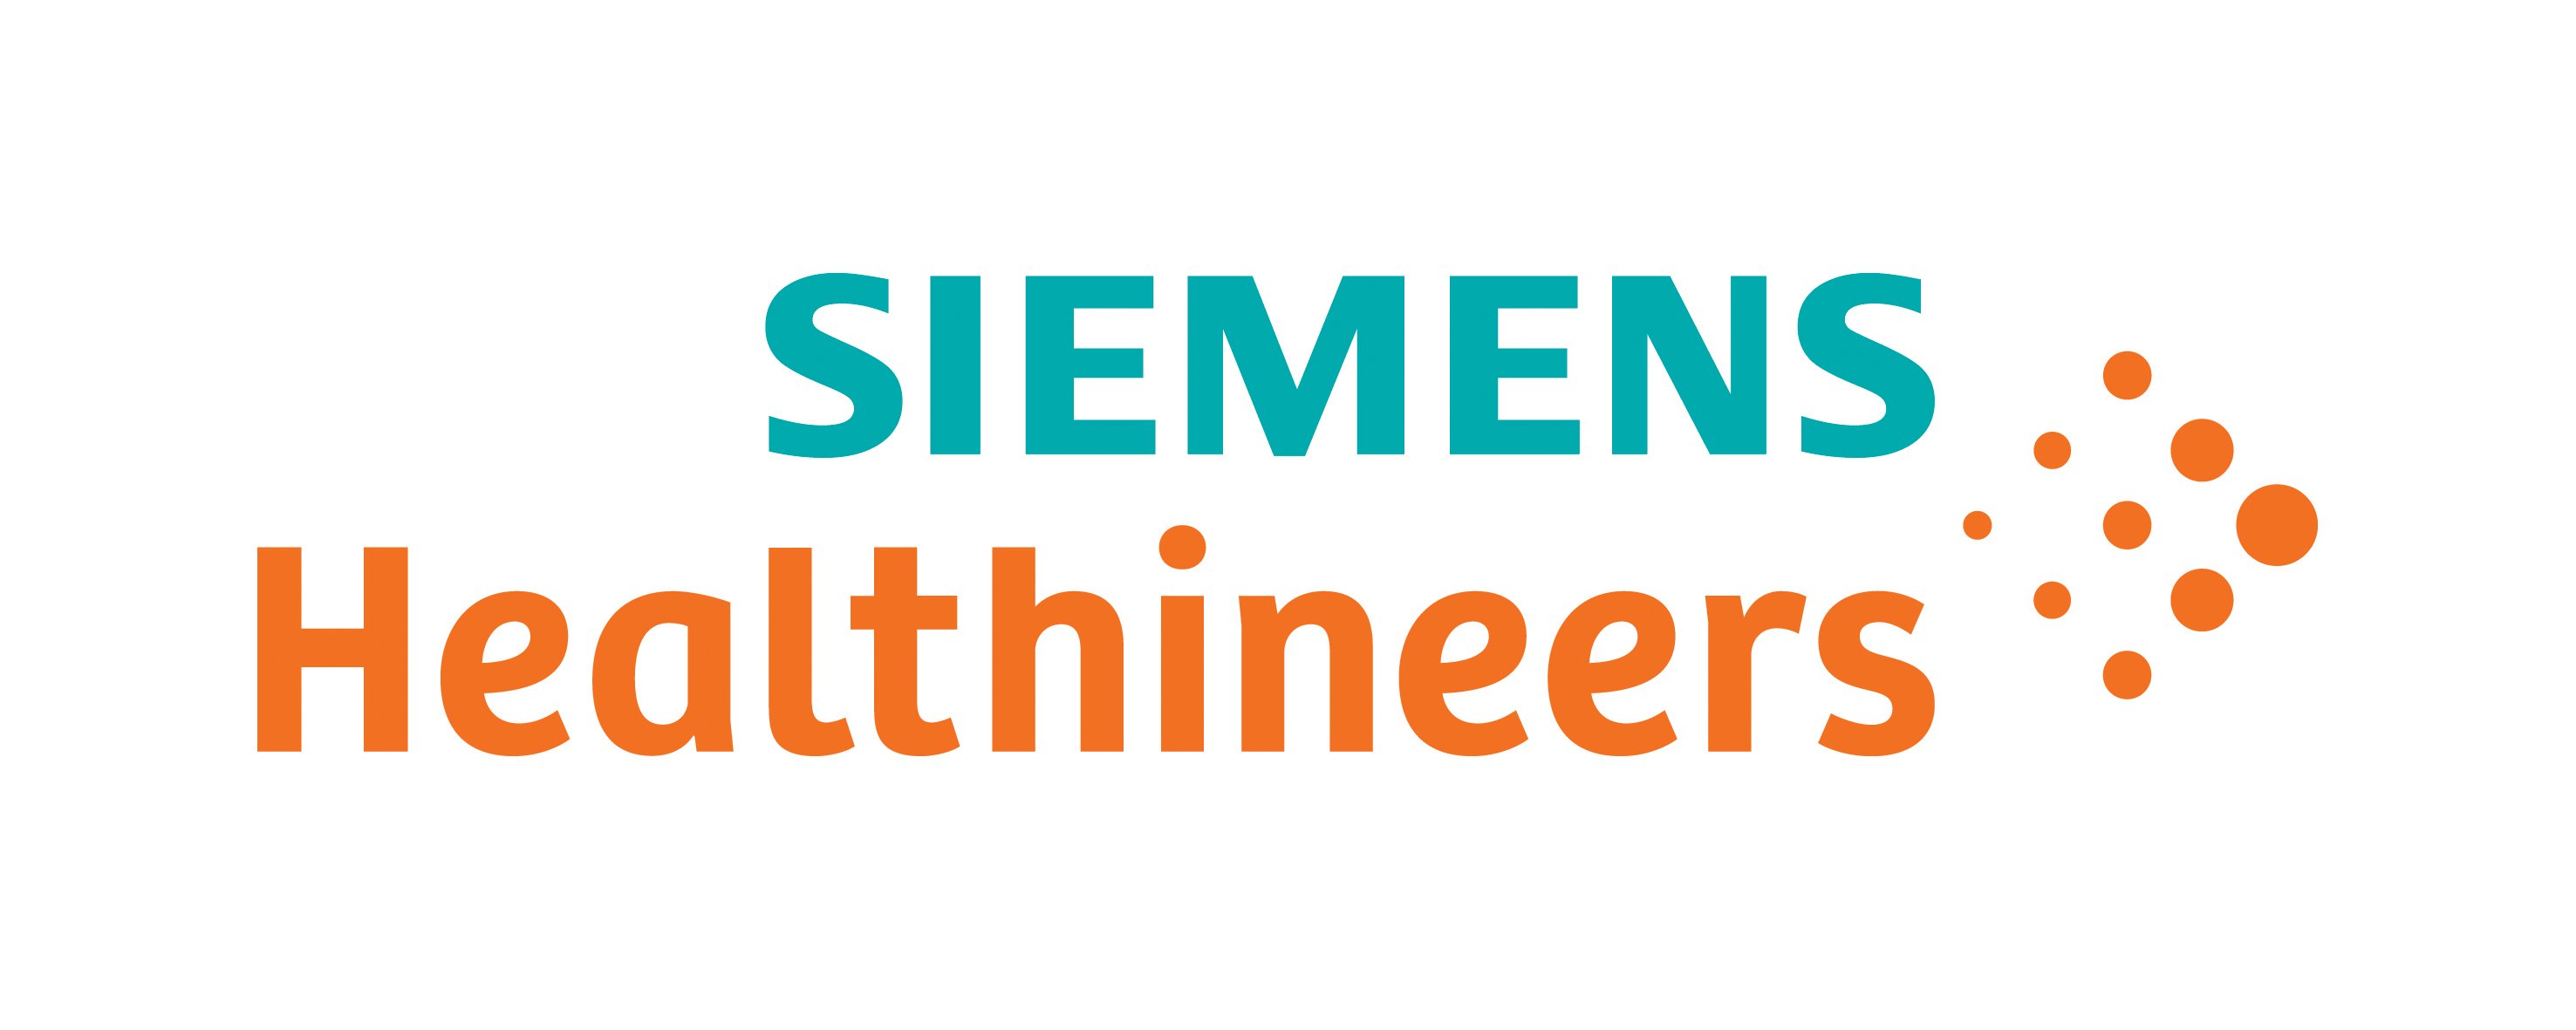 Siemens Introduces New Siemens Healthineers Brand Name | Imaging Technology News